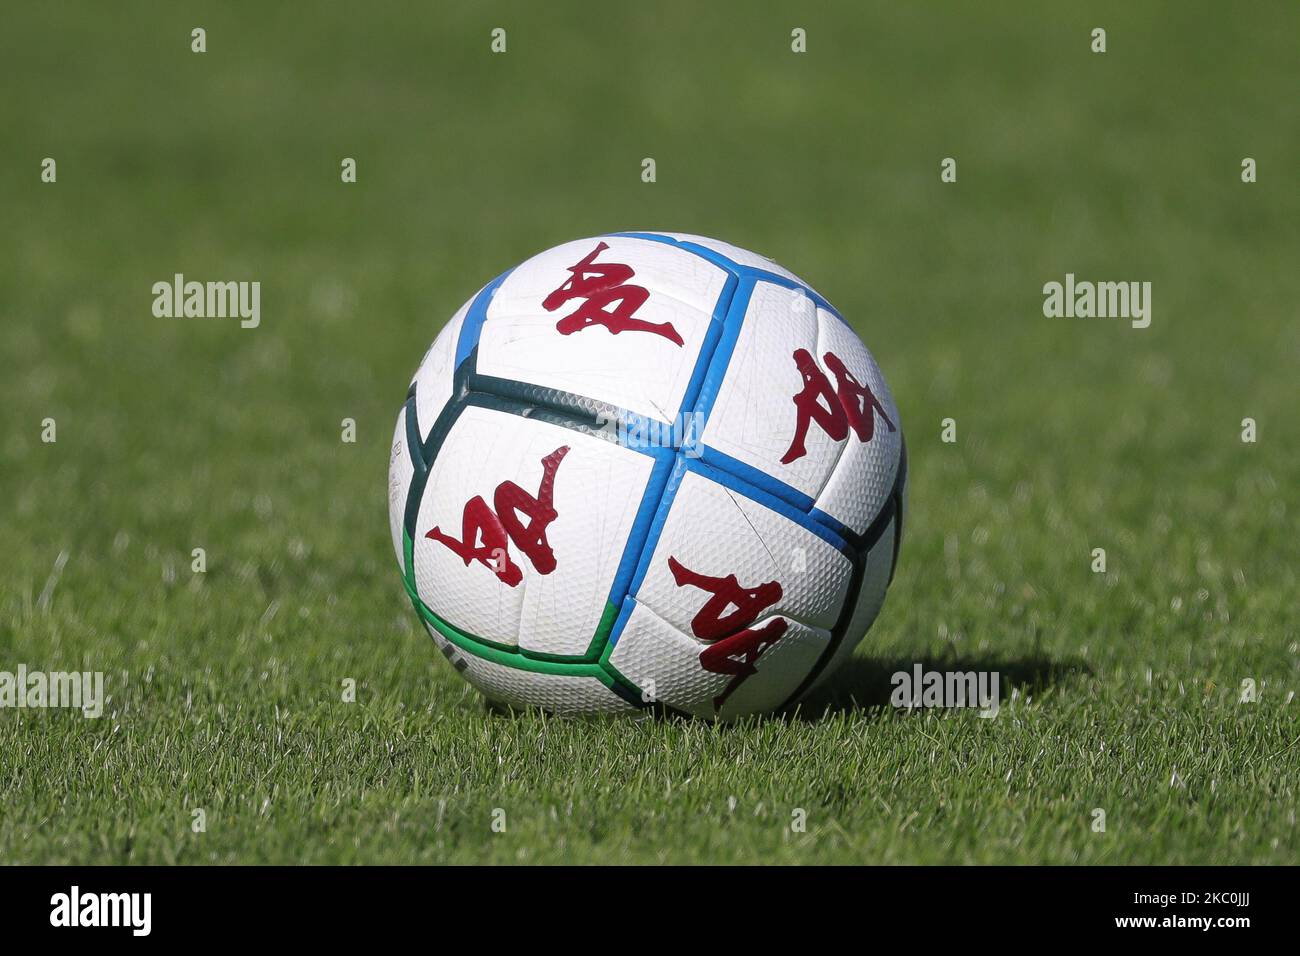 Kappa Official Ball during the Serie BKT match between Brescia and Ascoli at Stadio Mario Rigamonti on September 26, 2020 in Brescia, Italy. (Photo by Emmanuele Ciancaglini/NurPhoto) Stock Photo